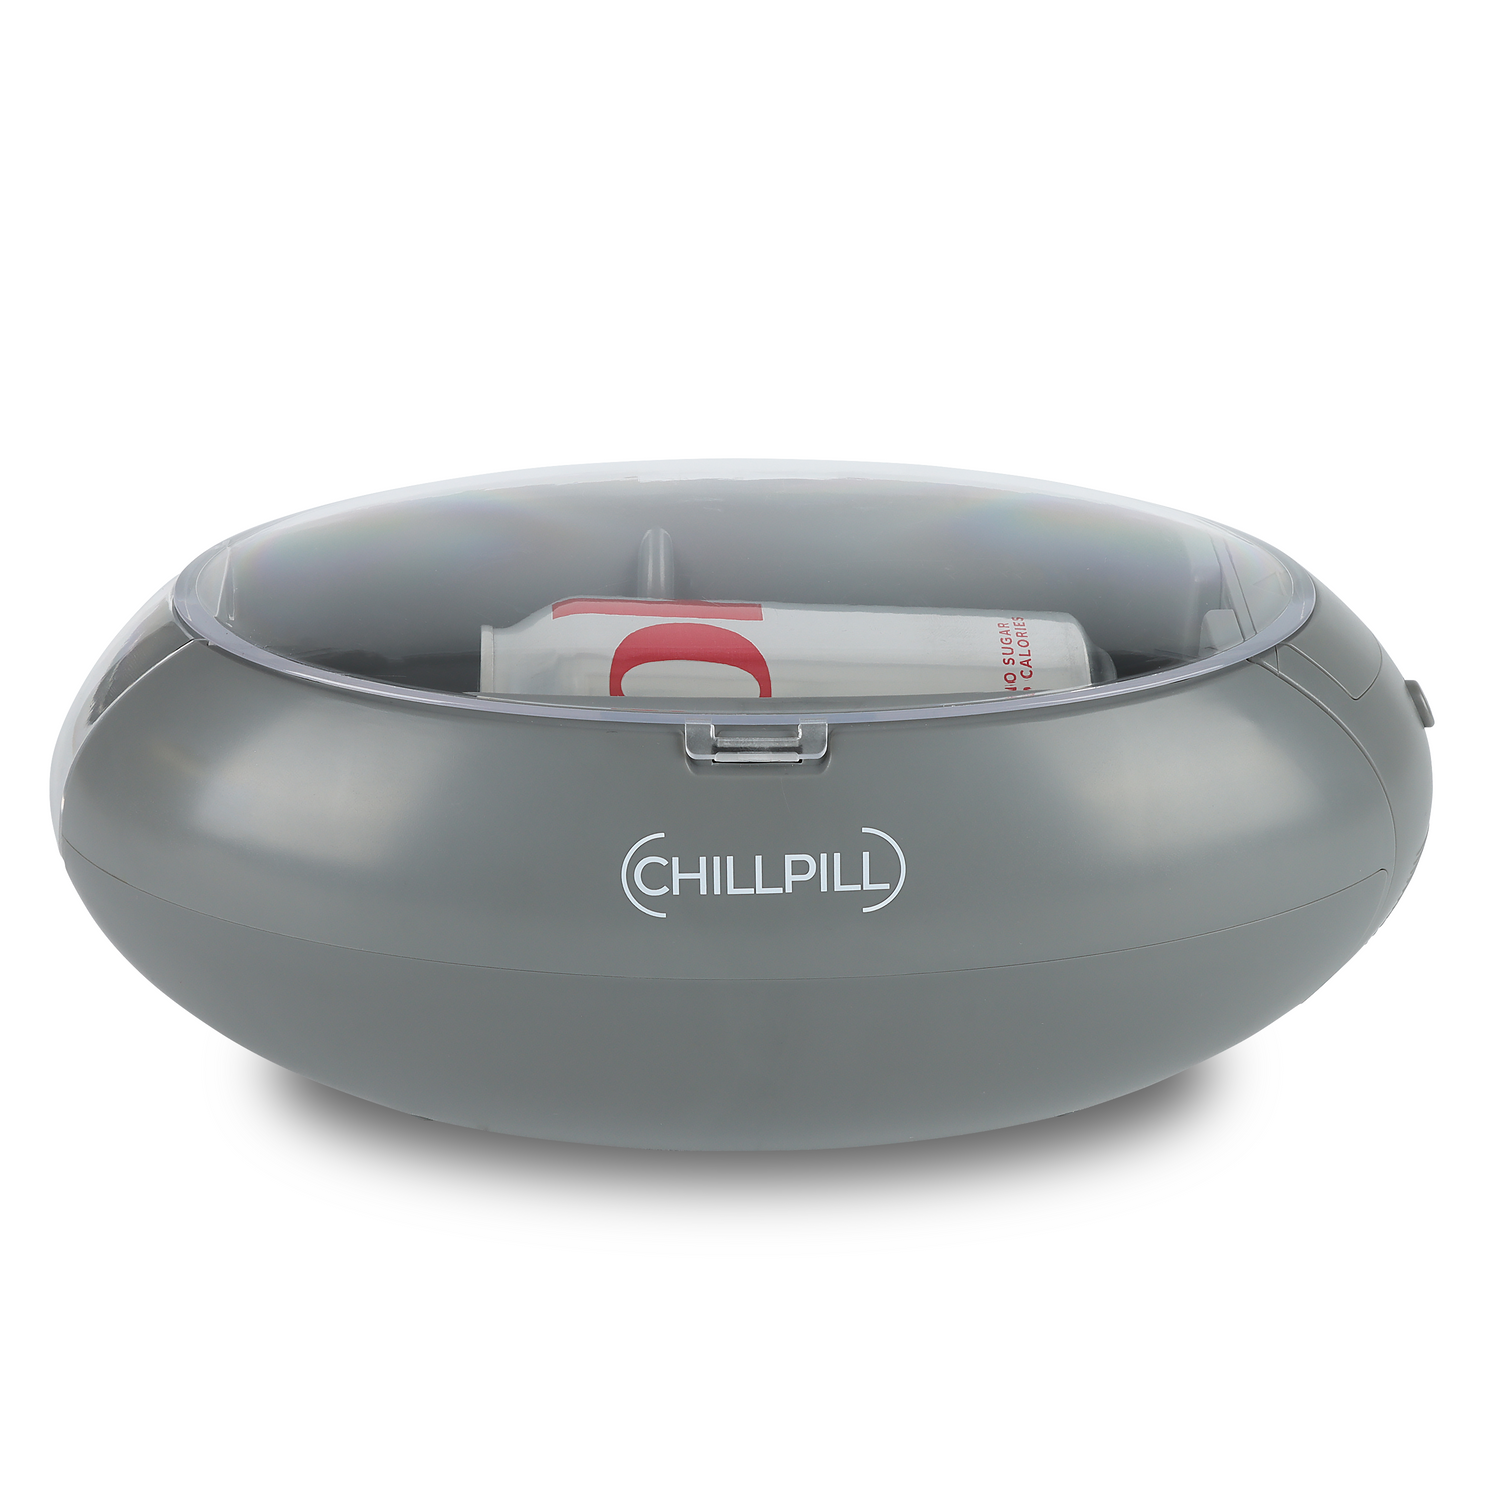  CHILLPILL Instant Beverage Chiller - Universal Can and